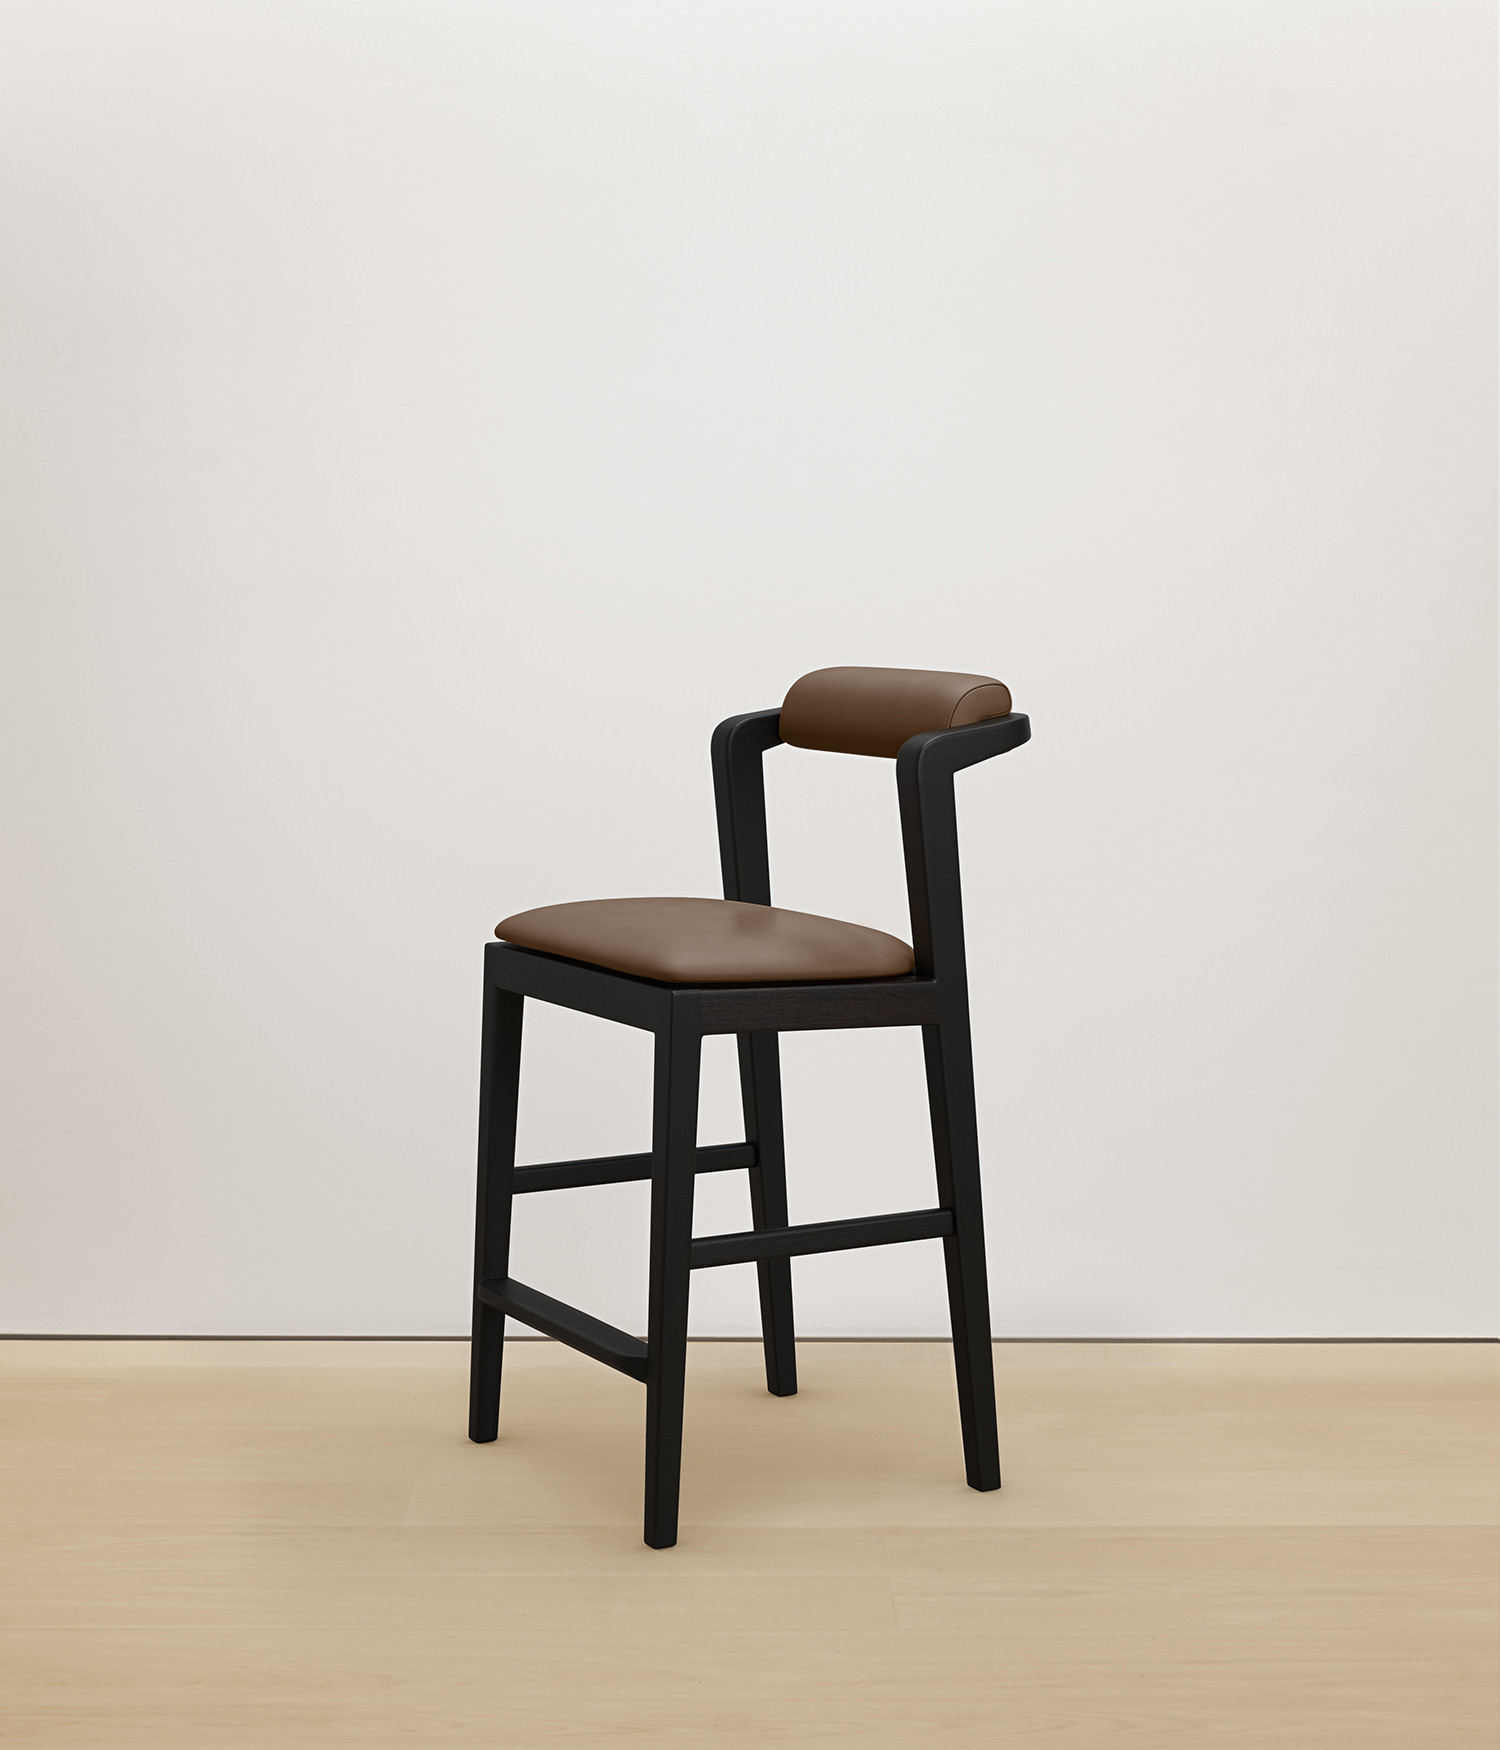  black-stained-oak stool with umber color upholstered seat